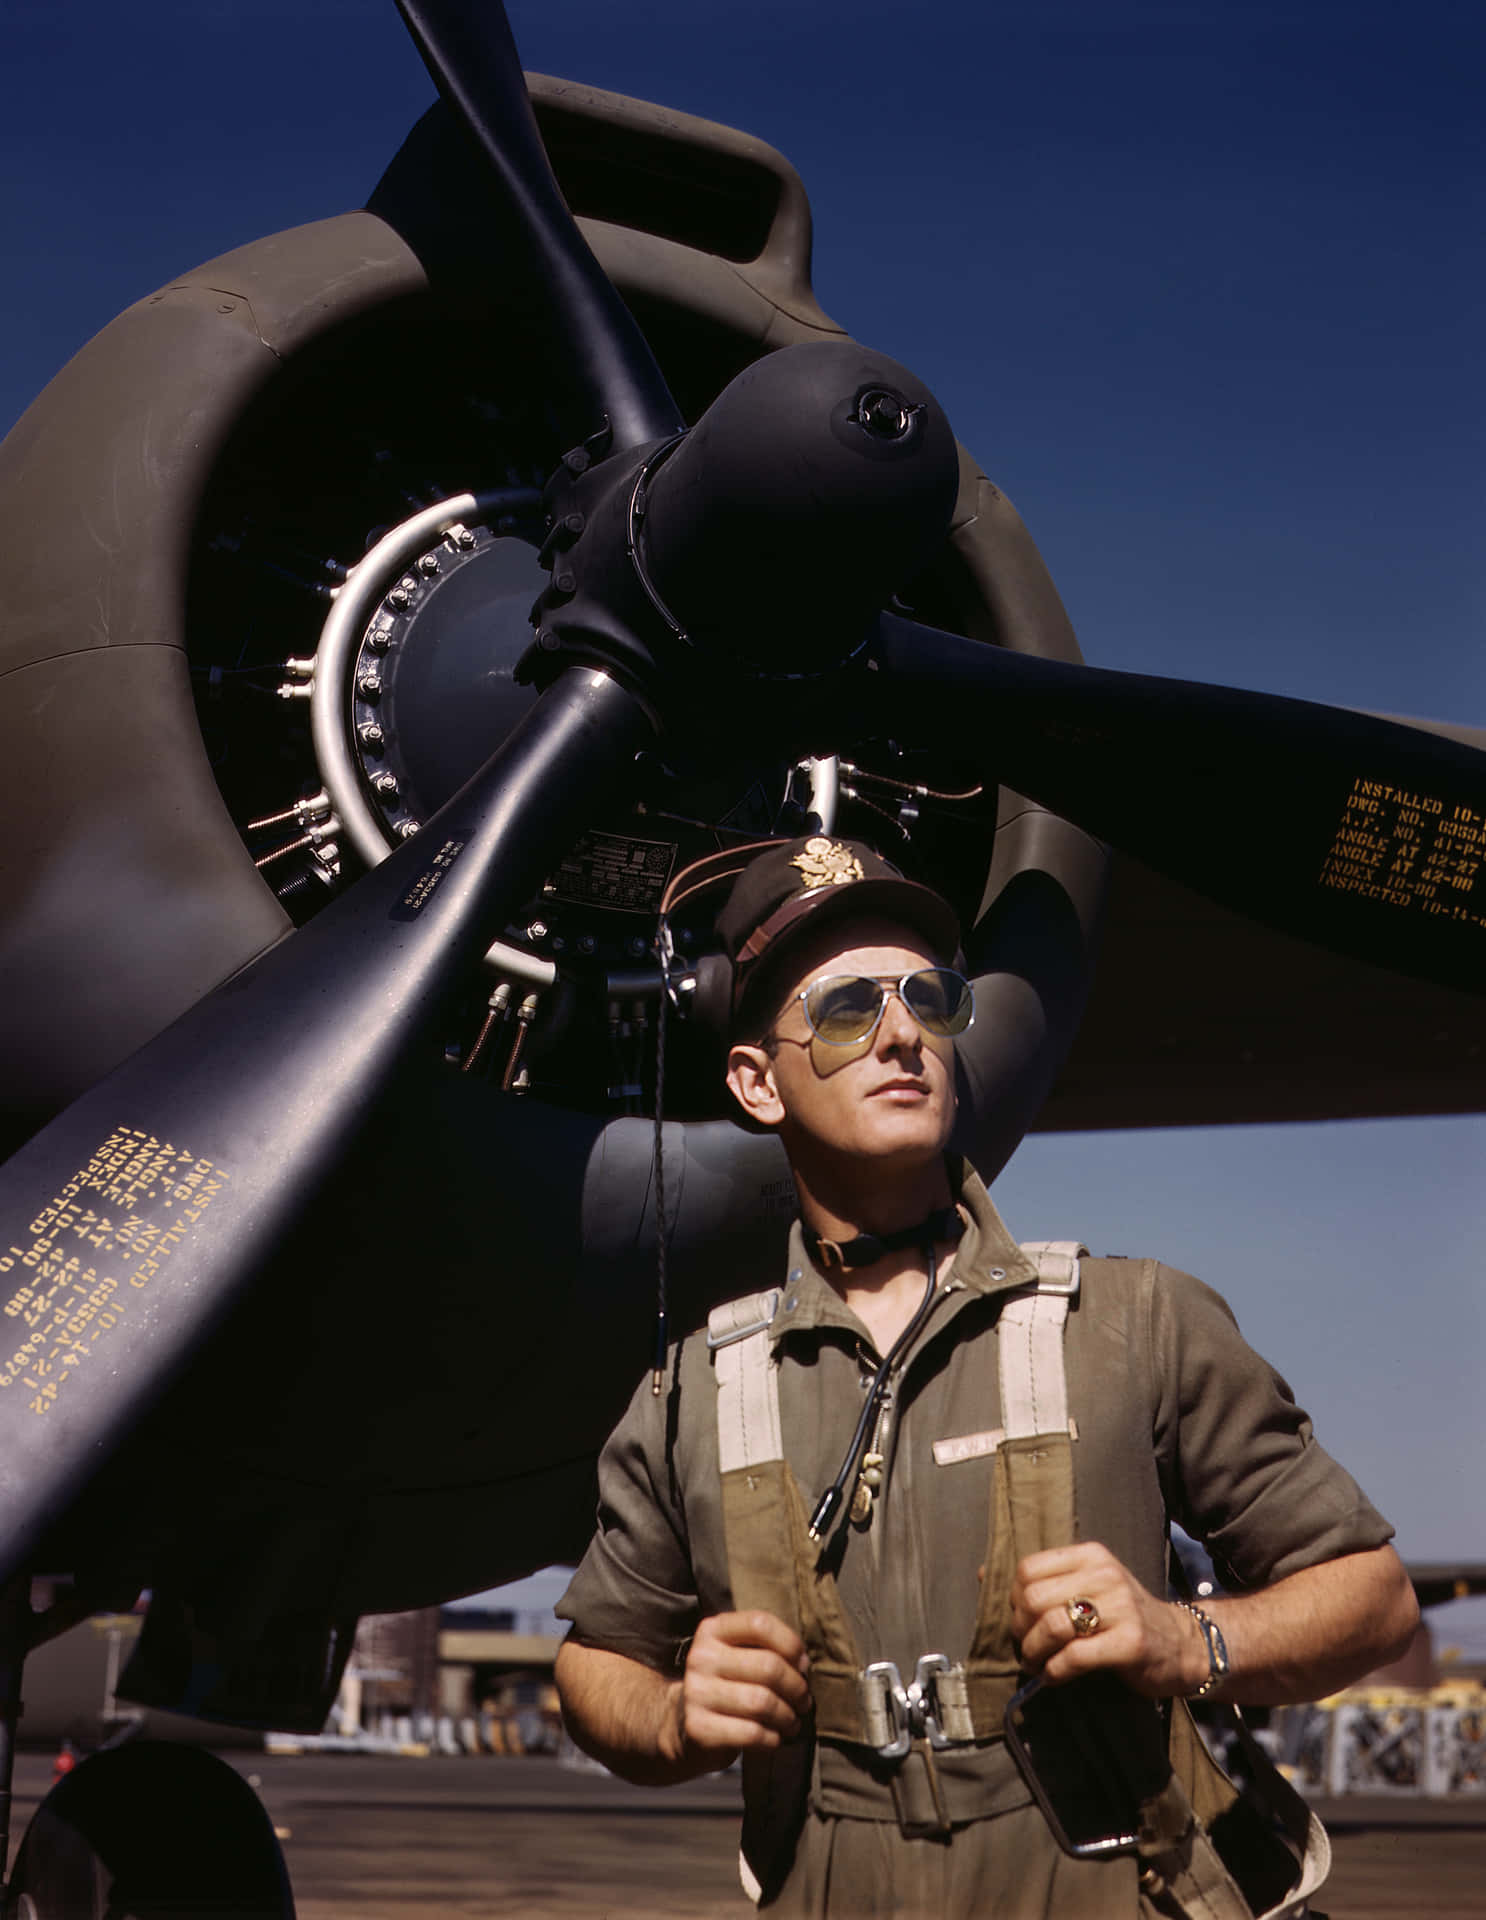 Man Pilot In Aircraft Picture